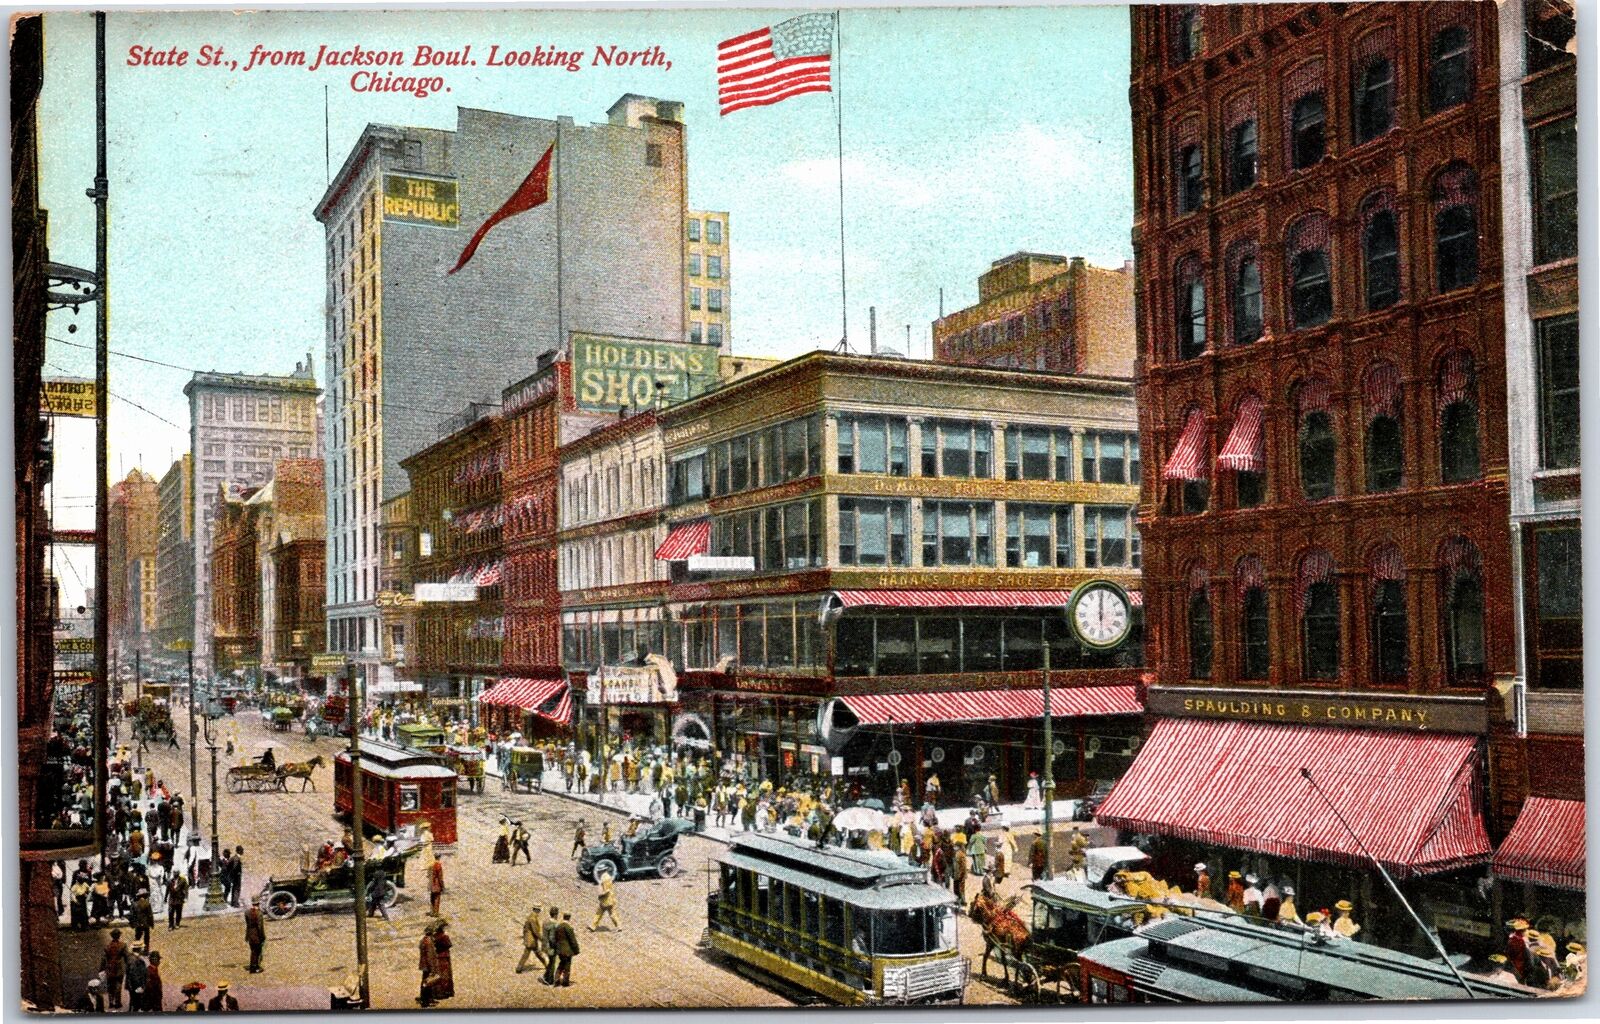 VINTAGE POSTCARD BUSY STATE STREET SCENE FROM JACKSON BOUL MAILED R.P.O. 1908